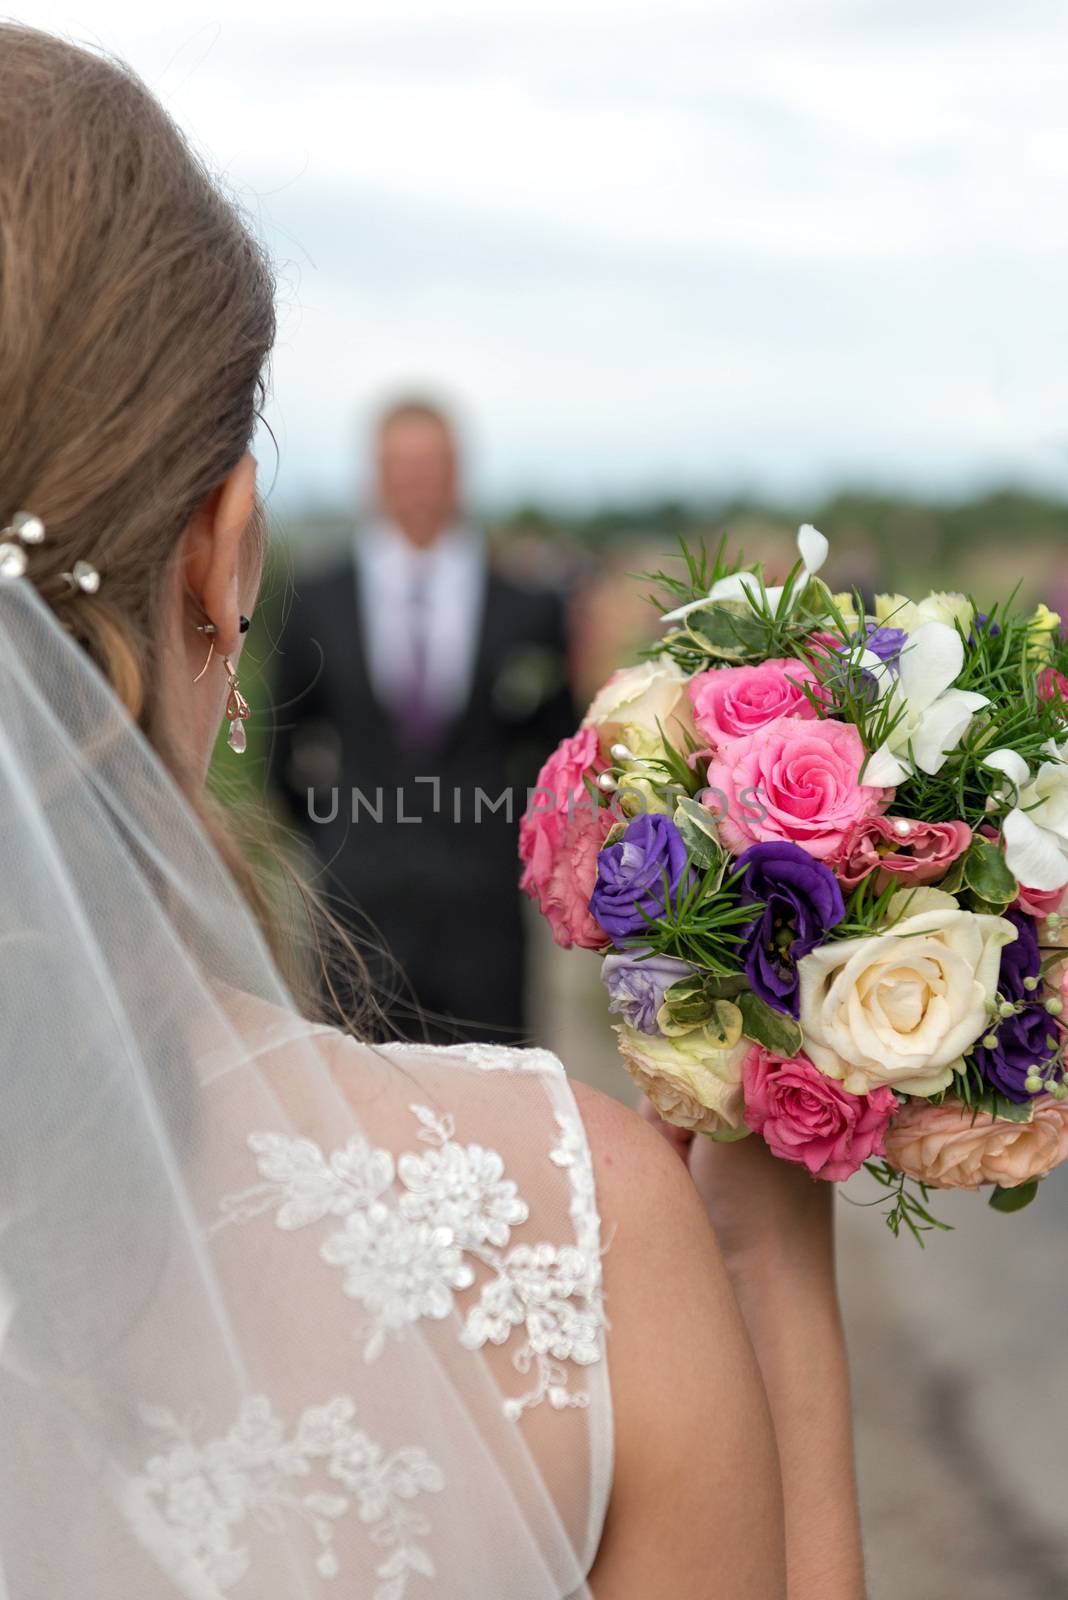 Bride with bridal bouquet in the hands of the groom expect.